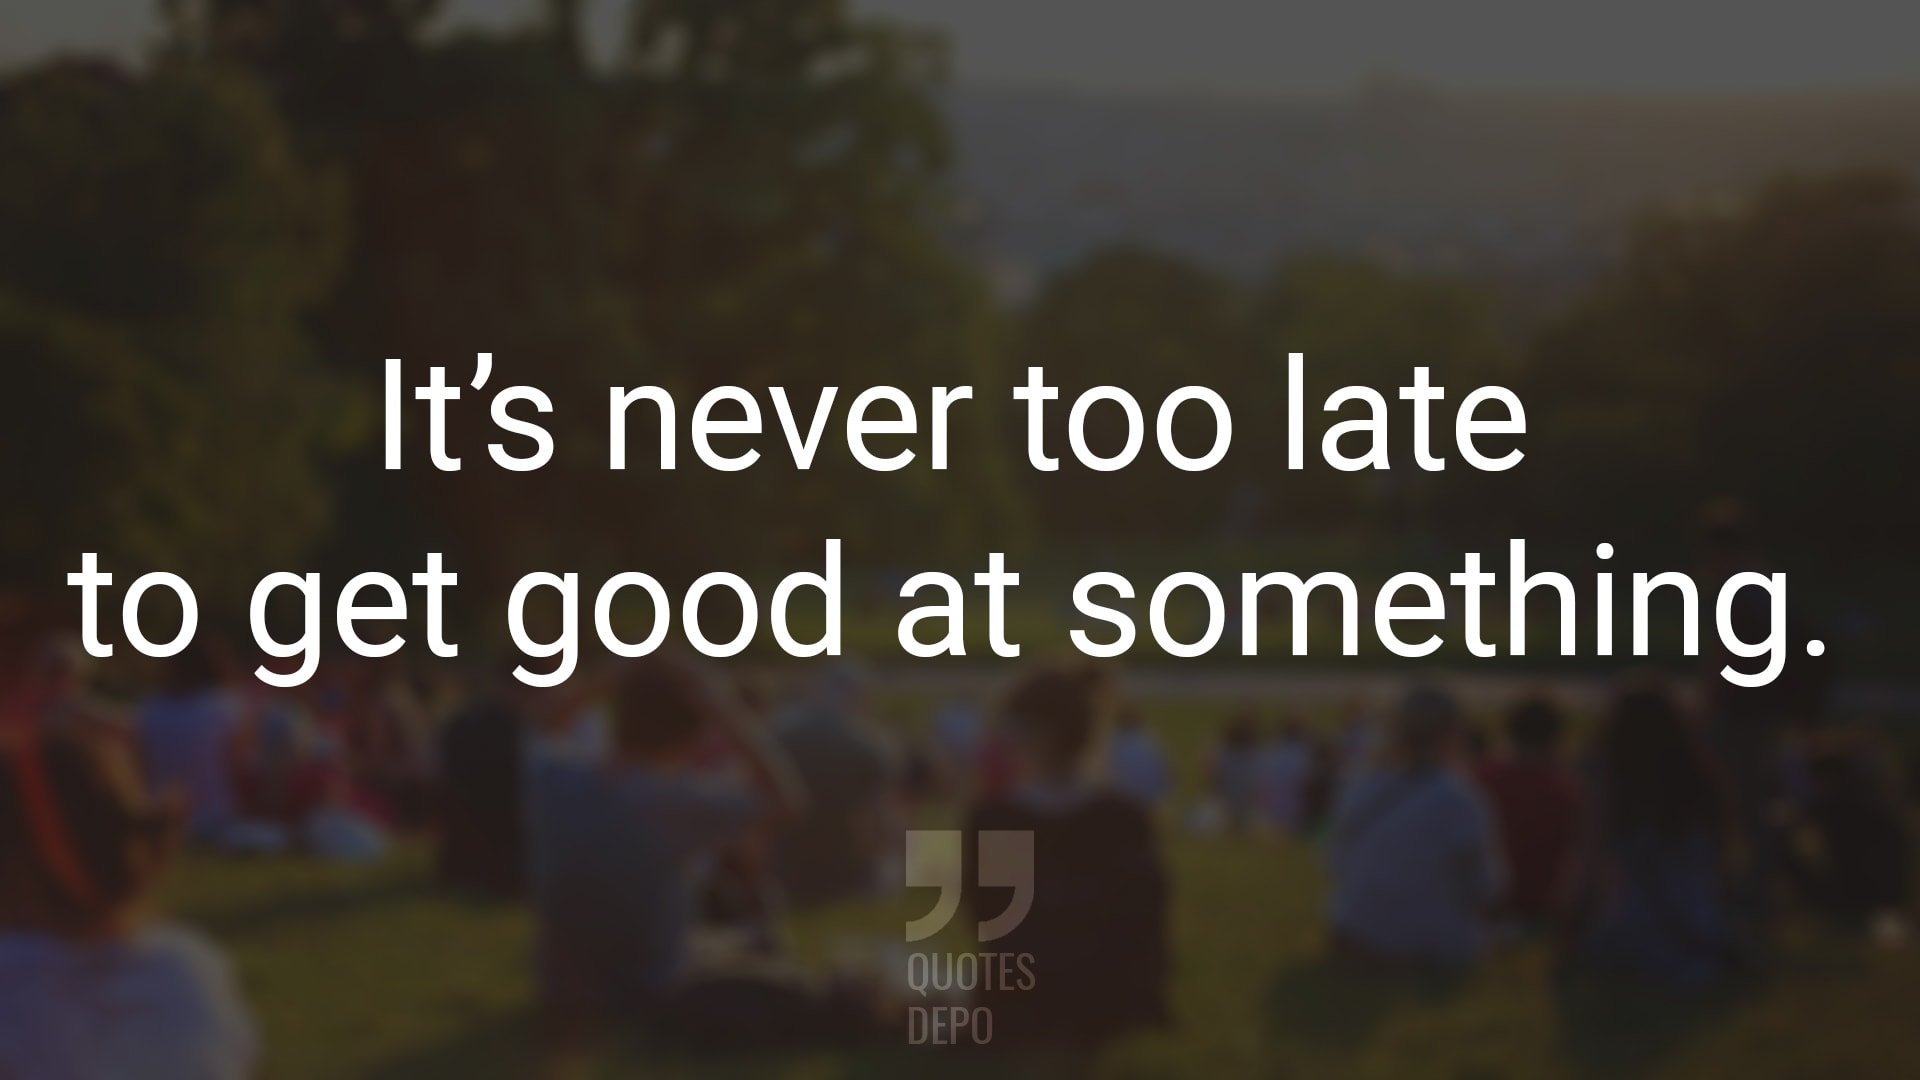 It’s Never Too Late to Get Good at Something